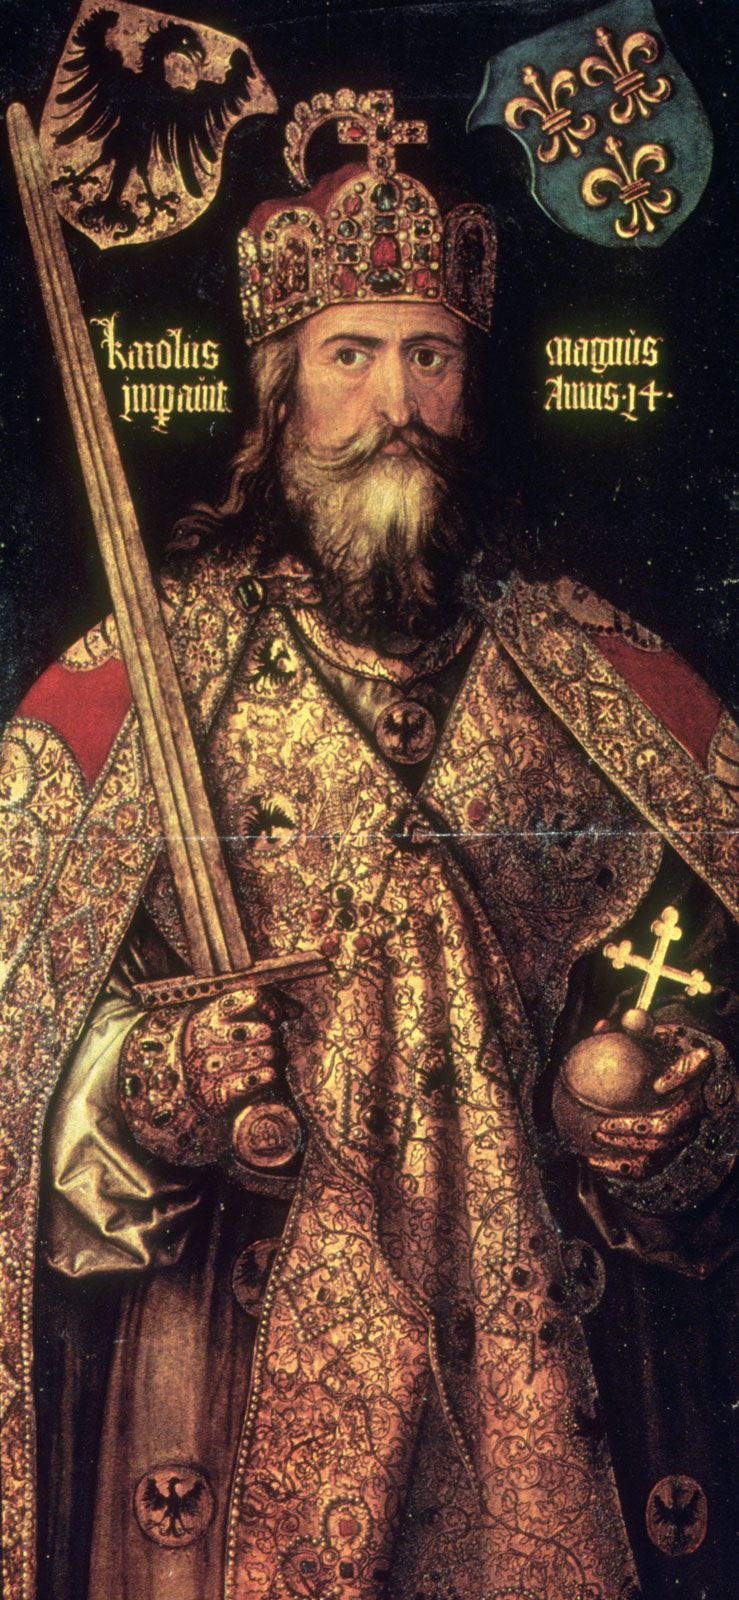 Charlemagne. Biography, Accomplishments, Children, & Facts